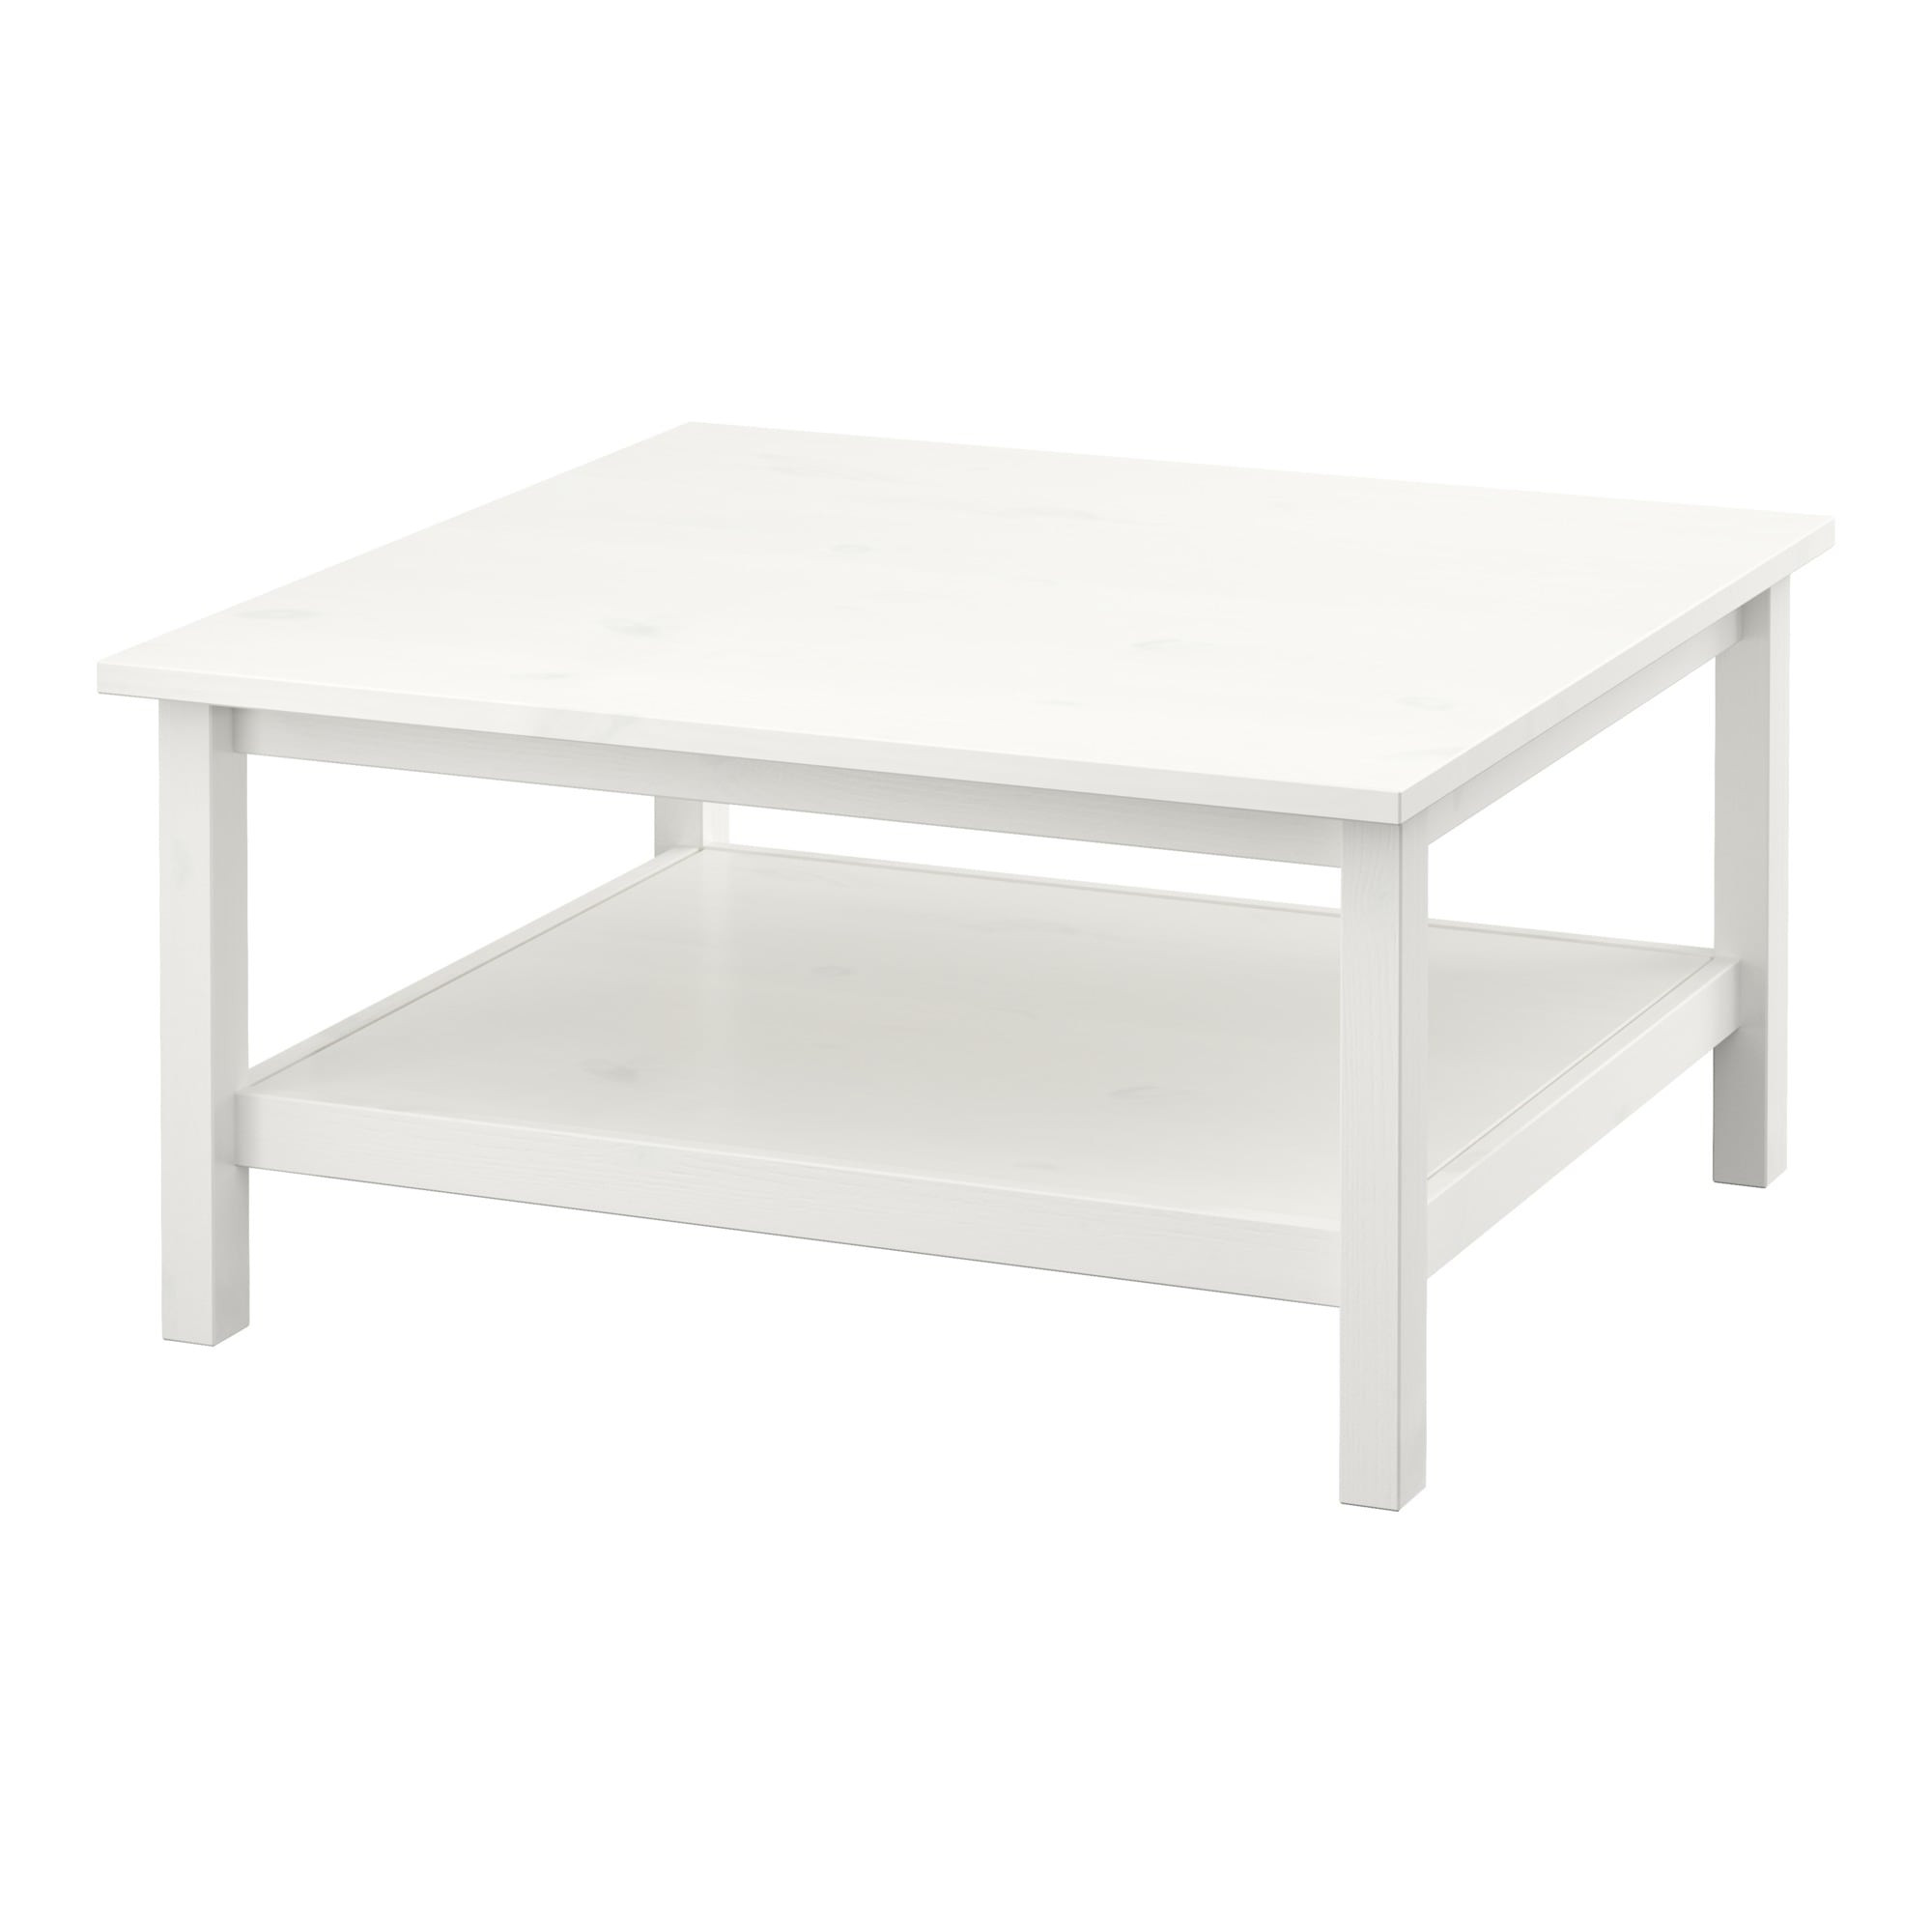 Best ideas about Ikea Coffee Table
. Save or Pin HEMNES Coffee table White stain 90 x 90 cm IKEA Now.